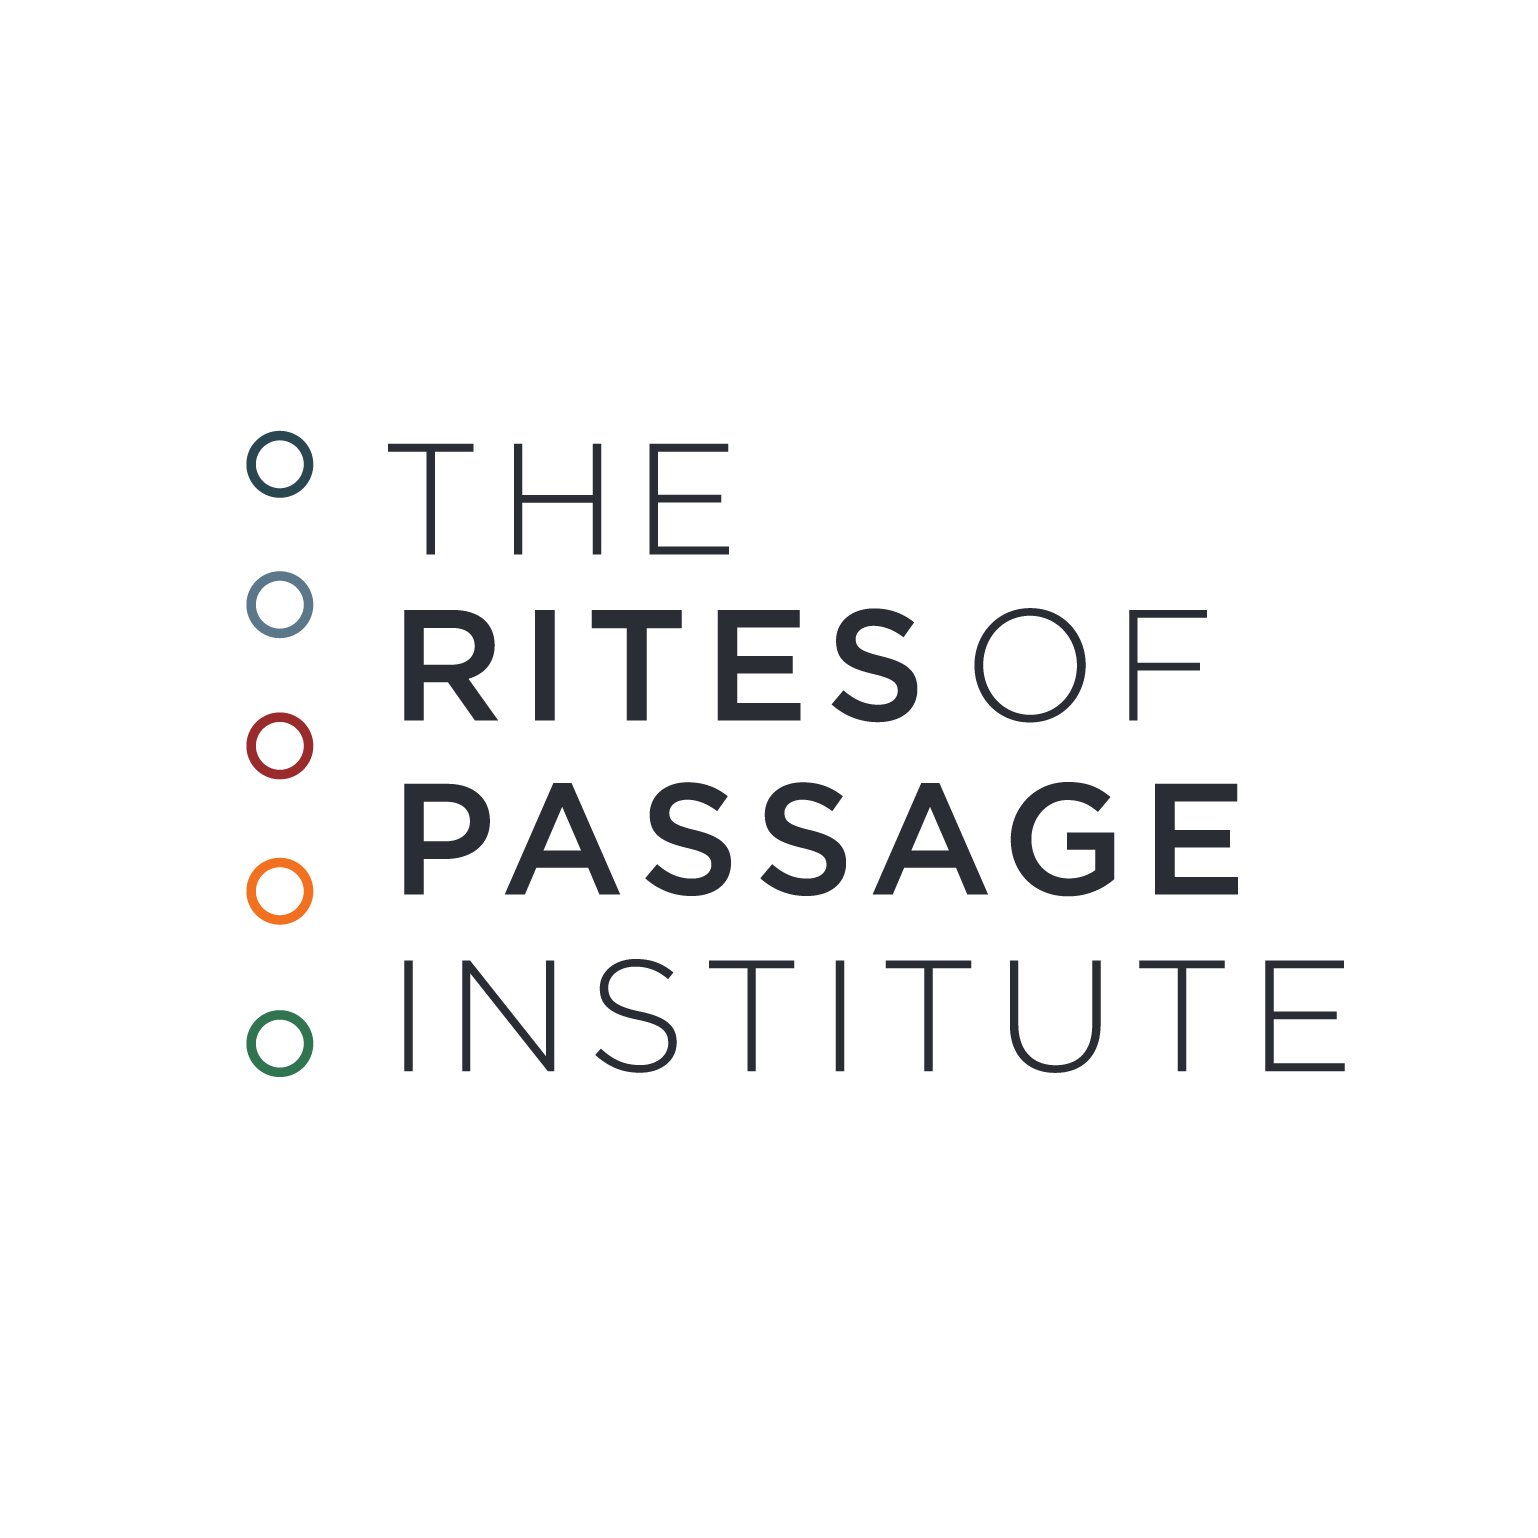 The Rites of Passage Institute helps people and communities strengthen identity, discover potential and create meaningful connection.